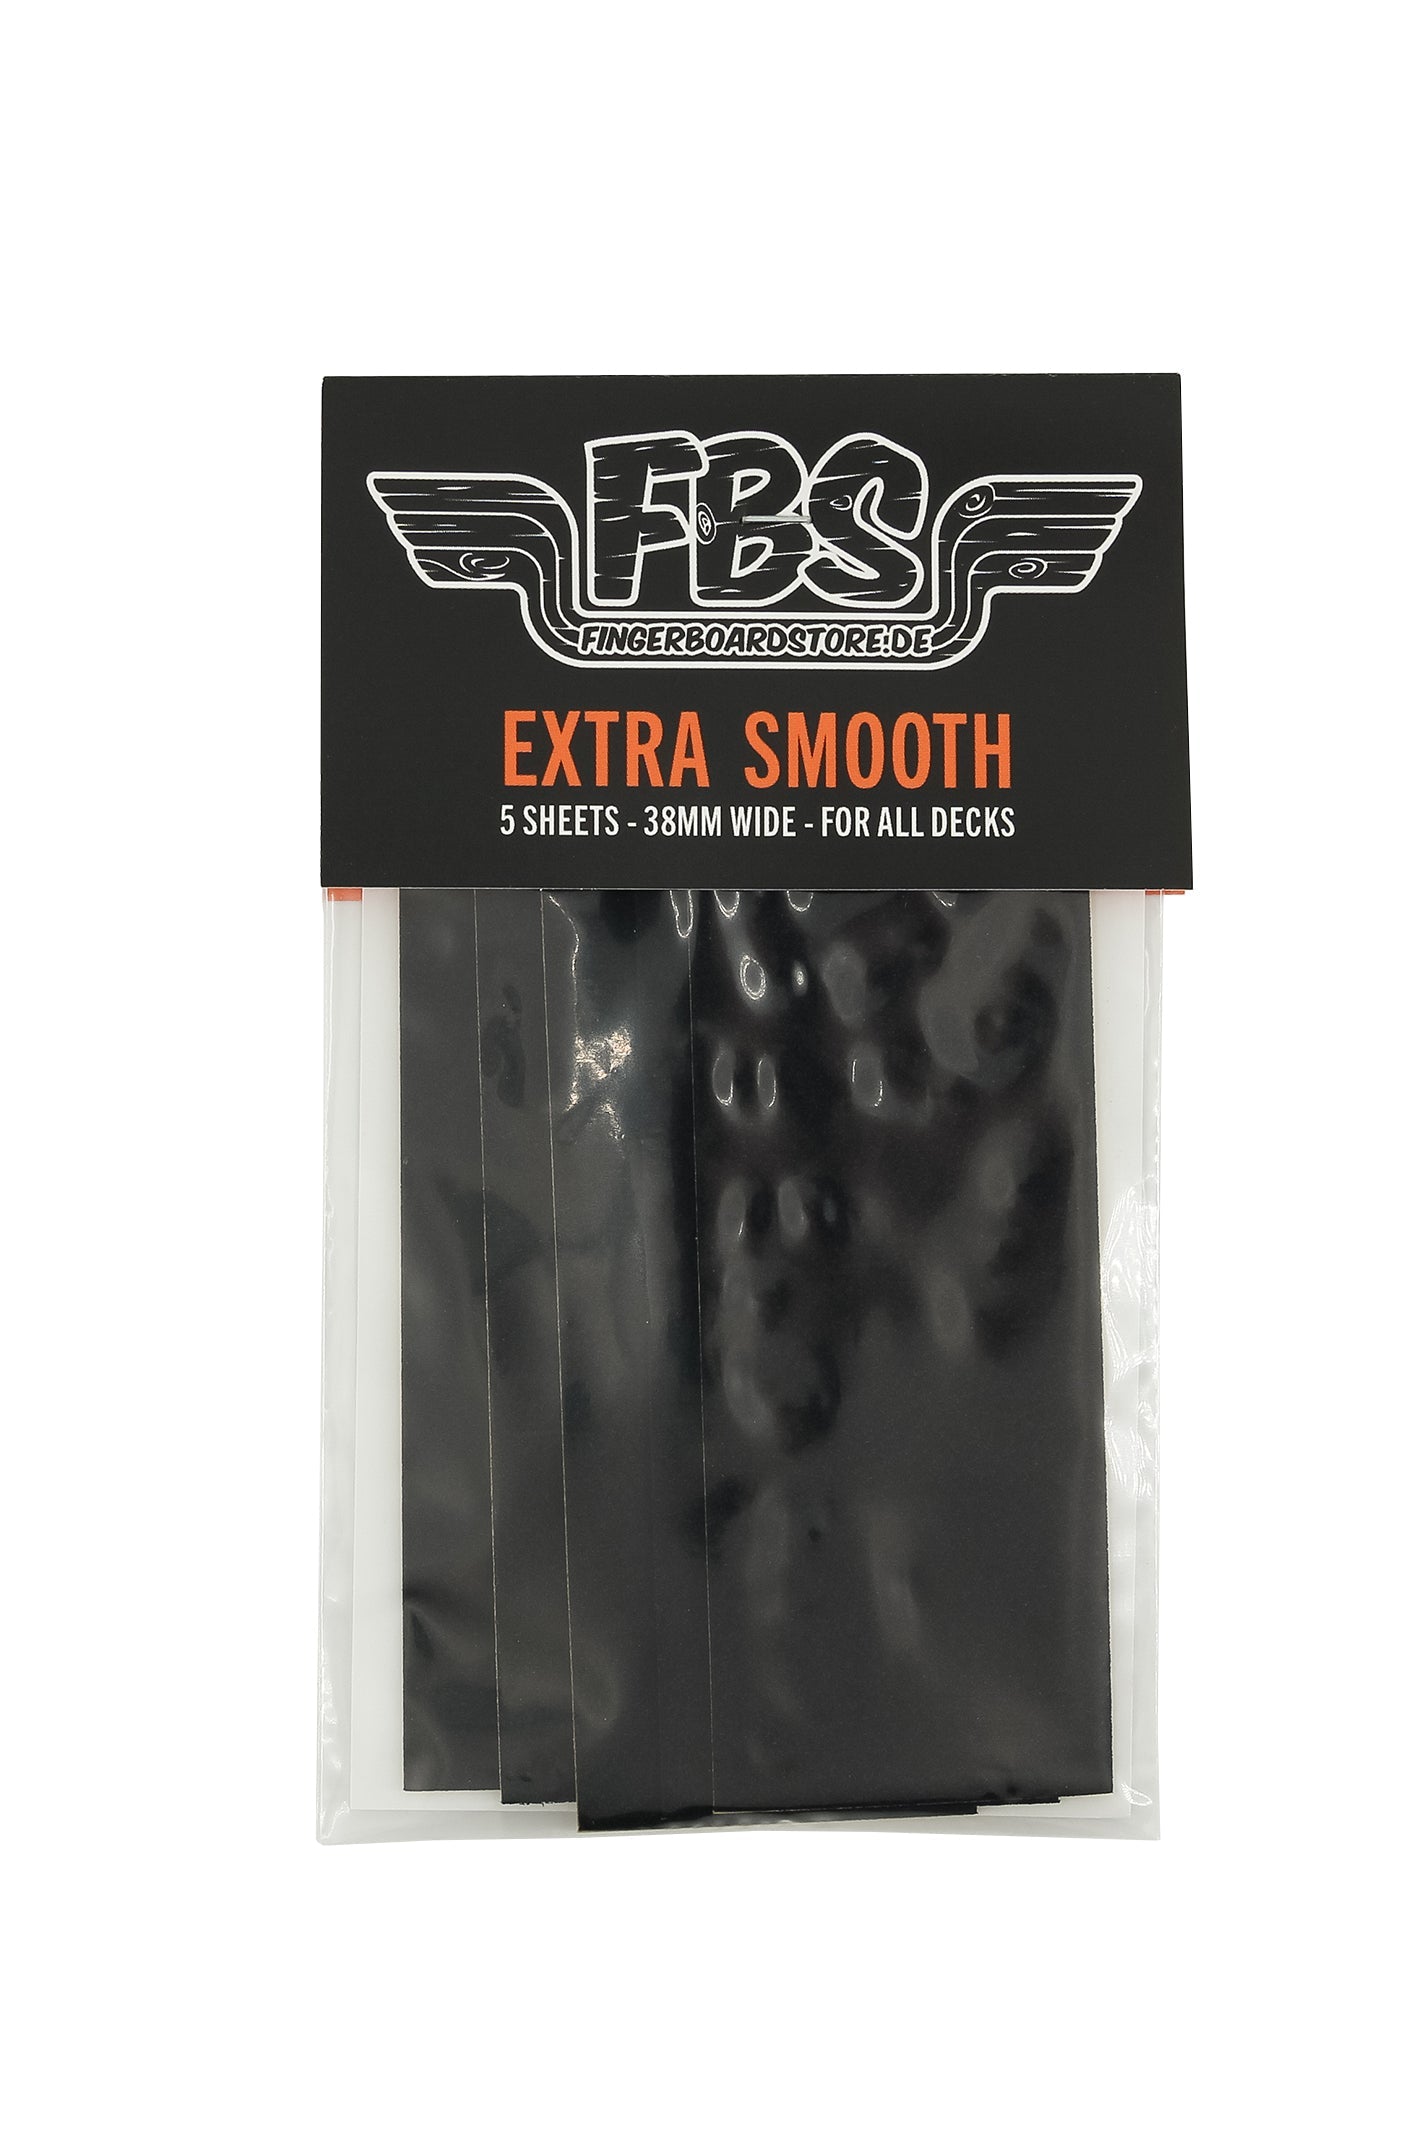 FBS Extra Smooth (3 packs)